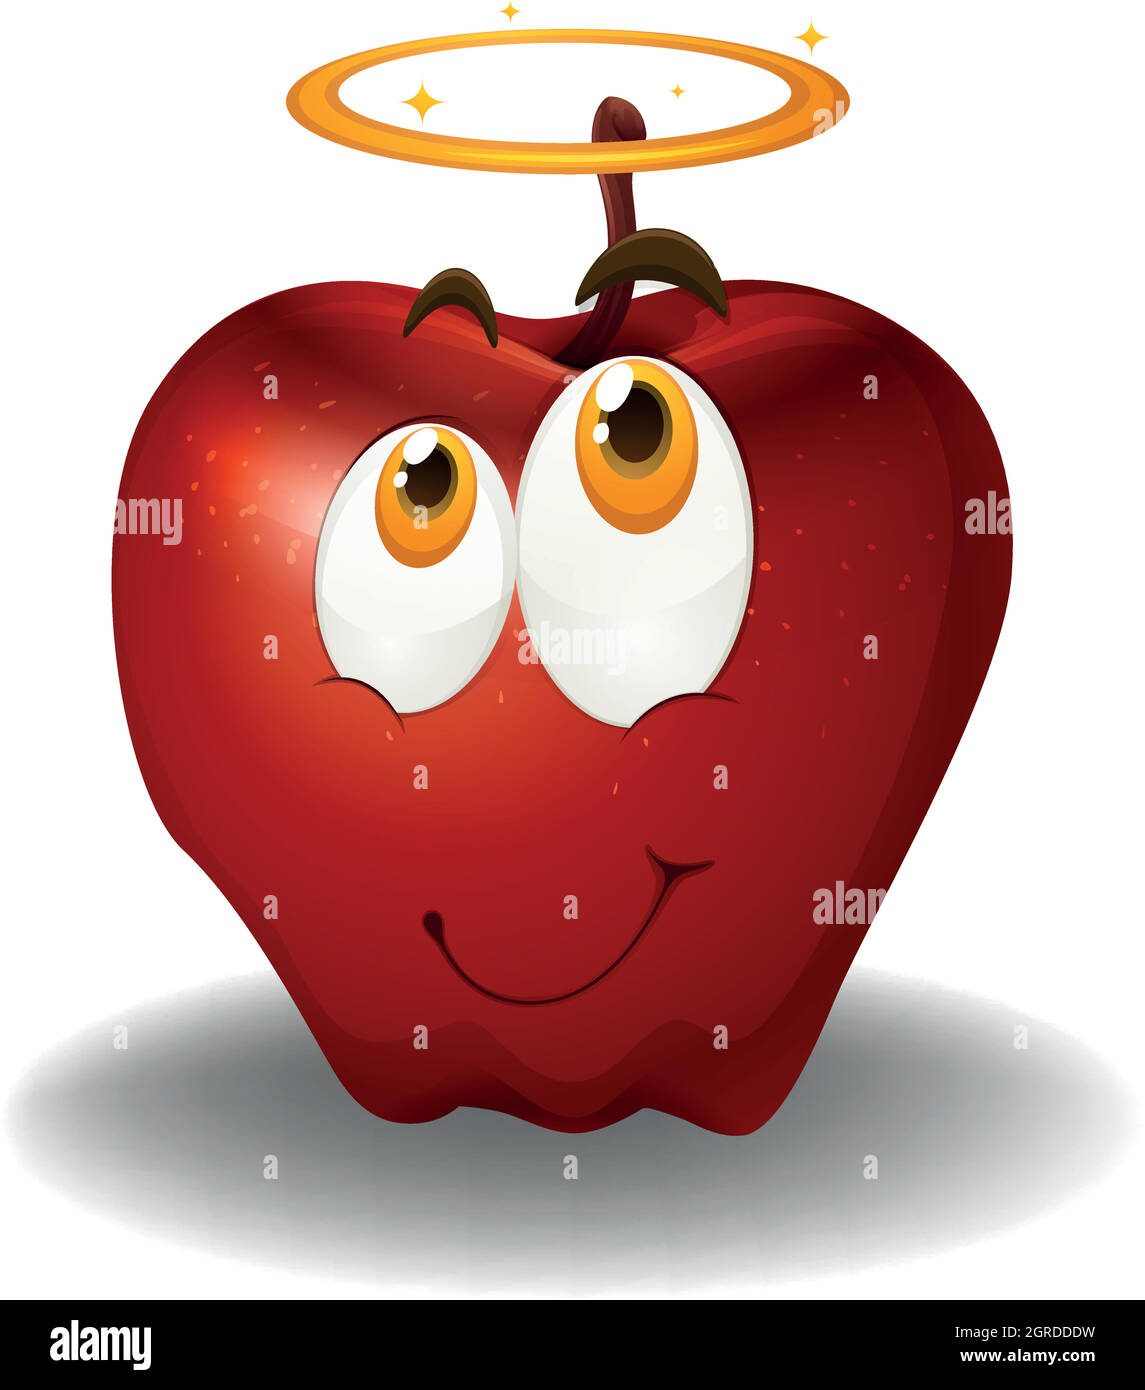 Red apple with happy face Stock Vector